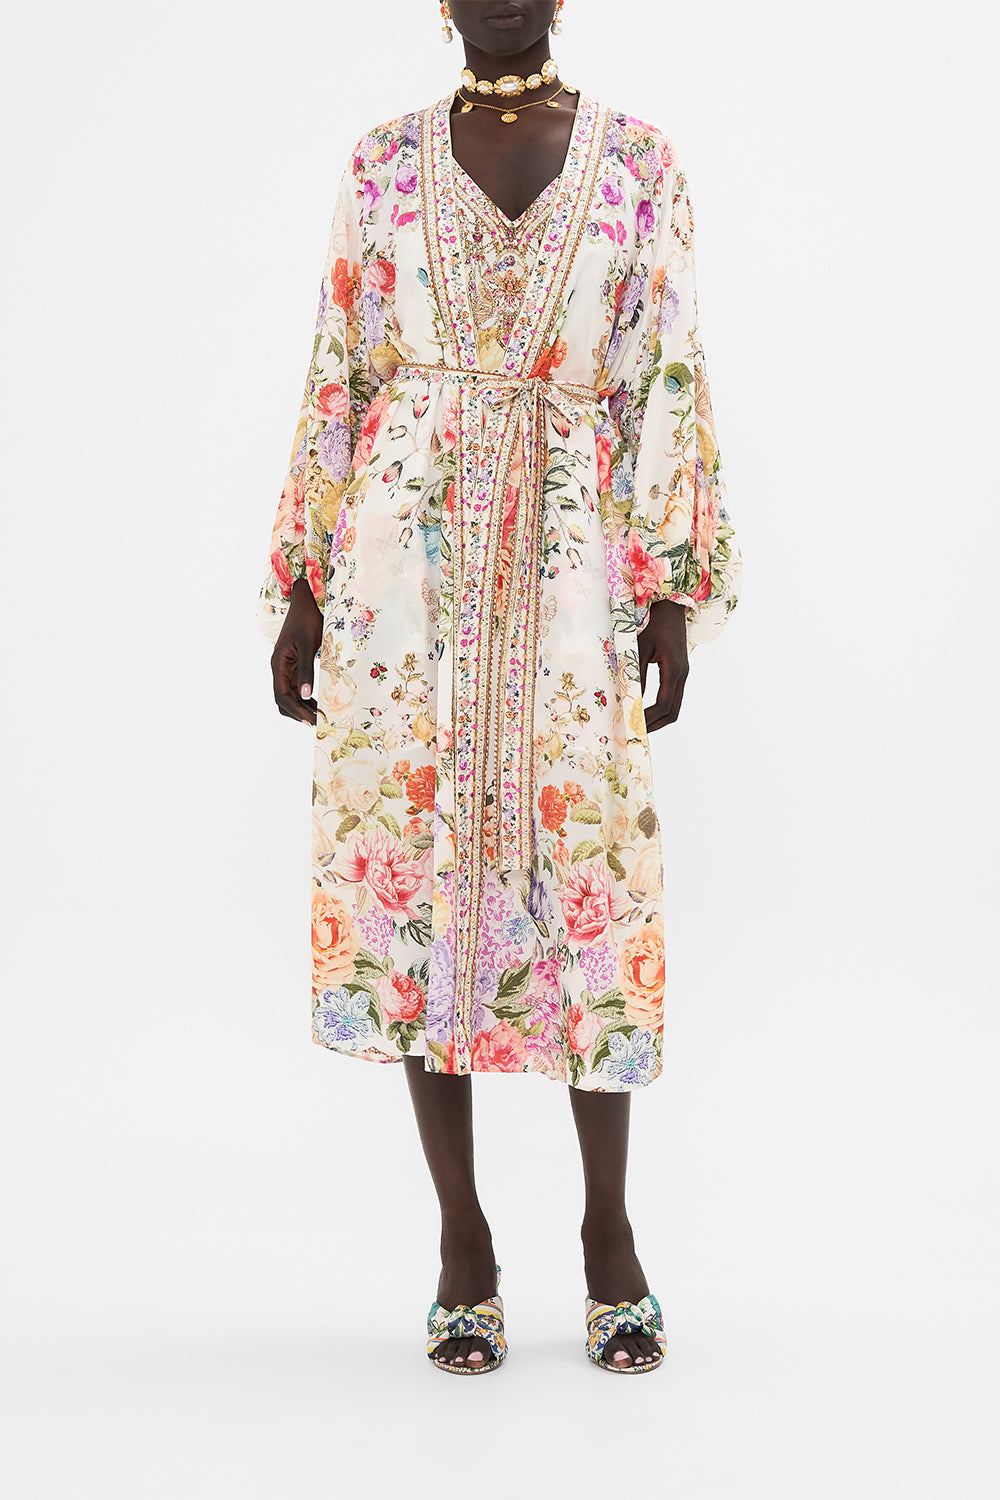 CAMILLA floral blouson sleeve layer in Sew Yesterday print